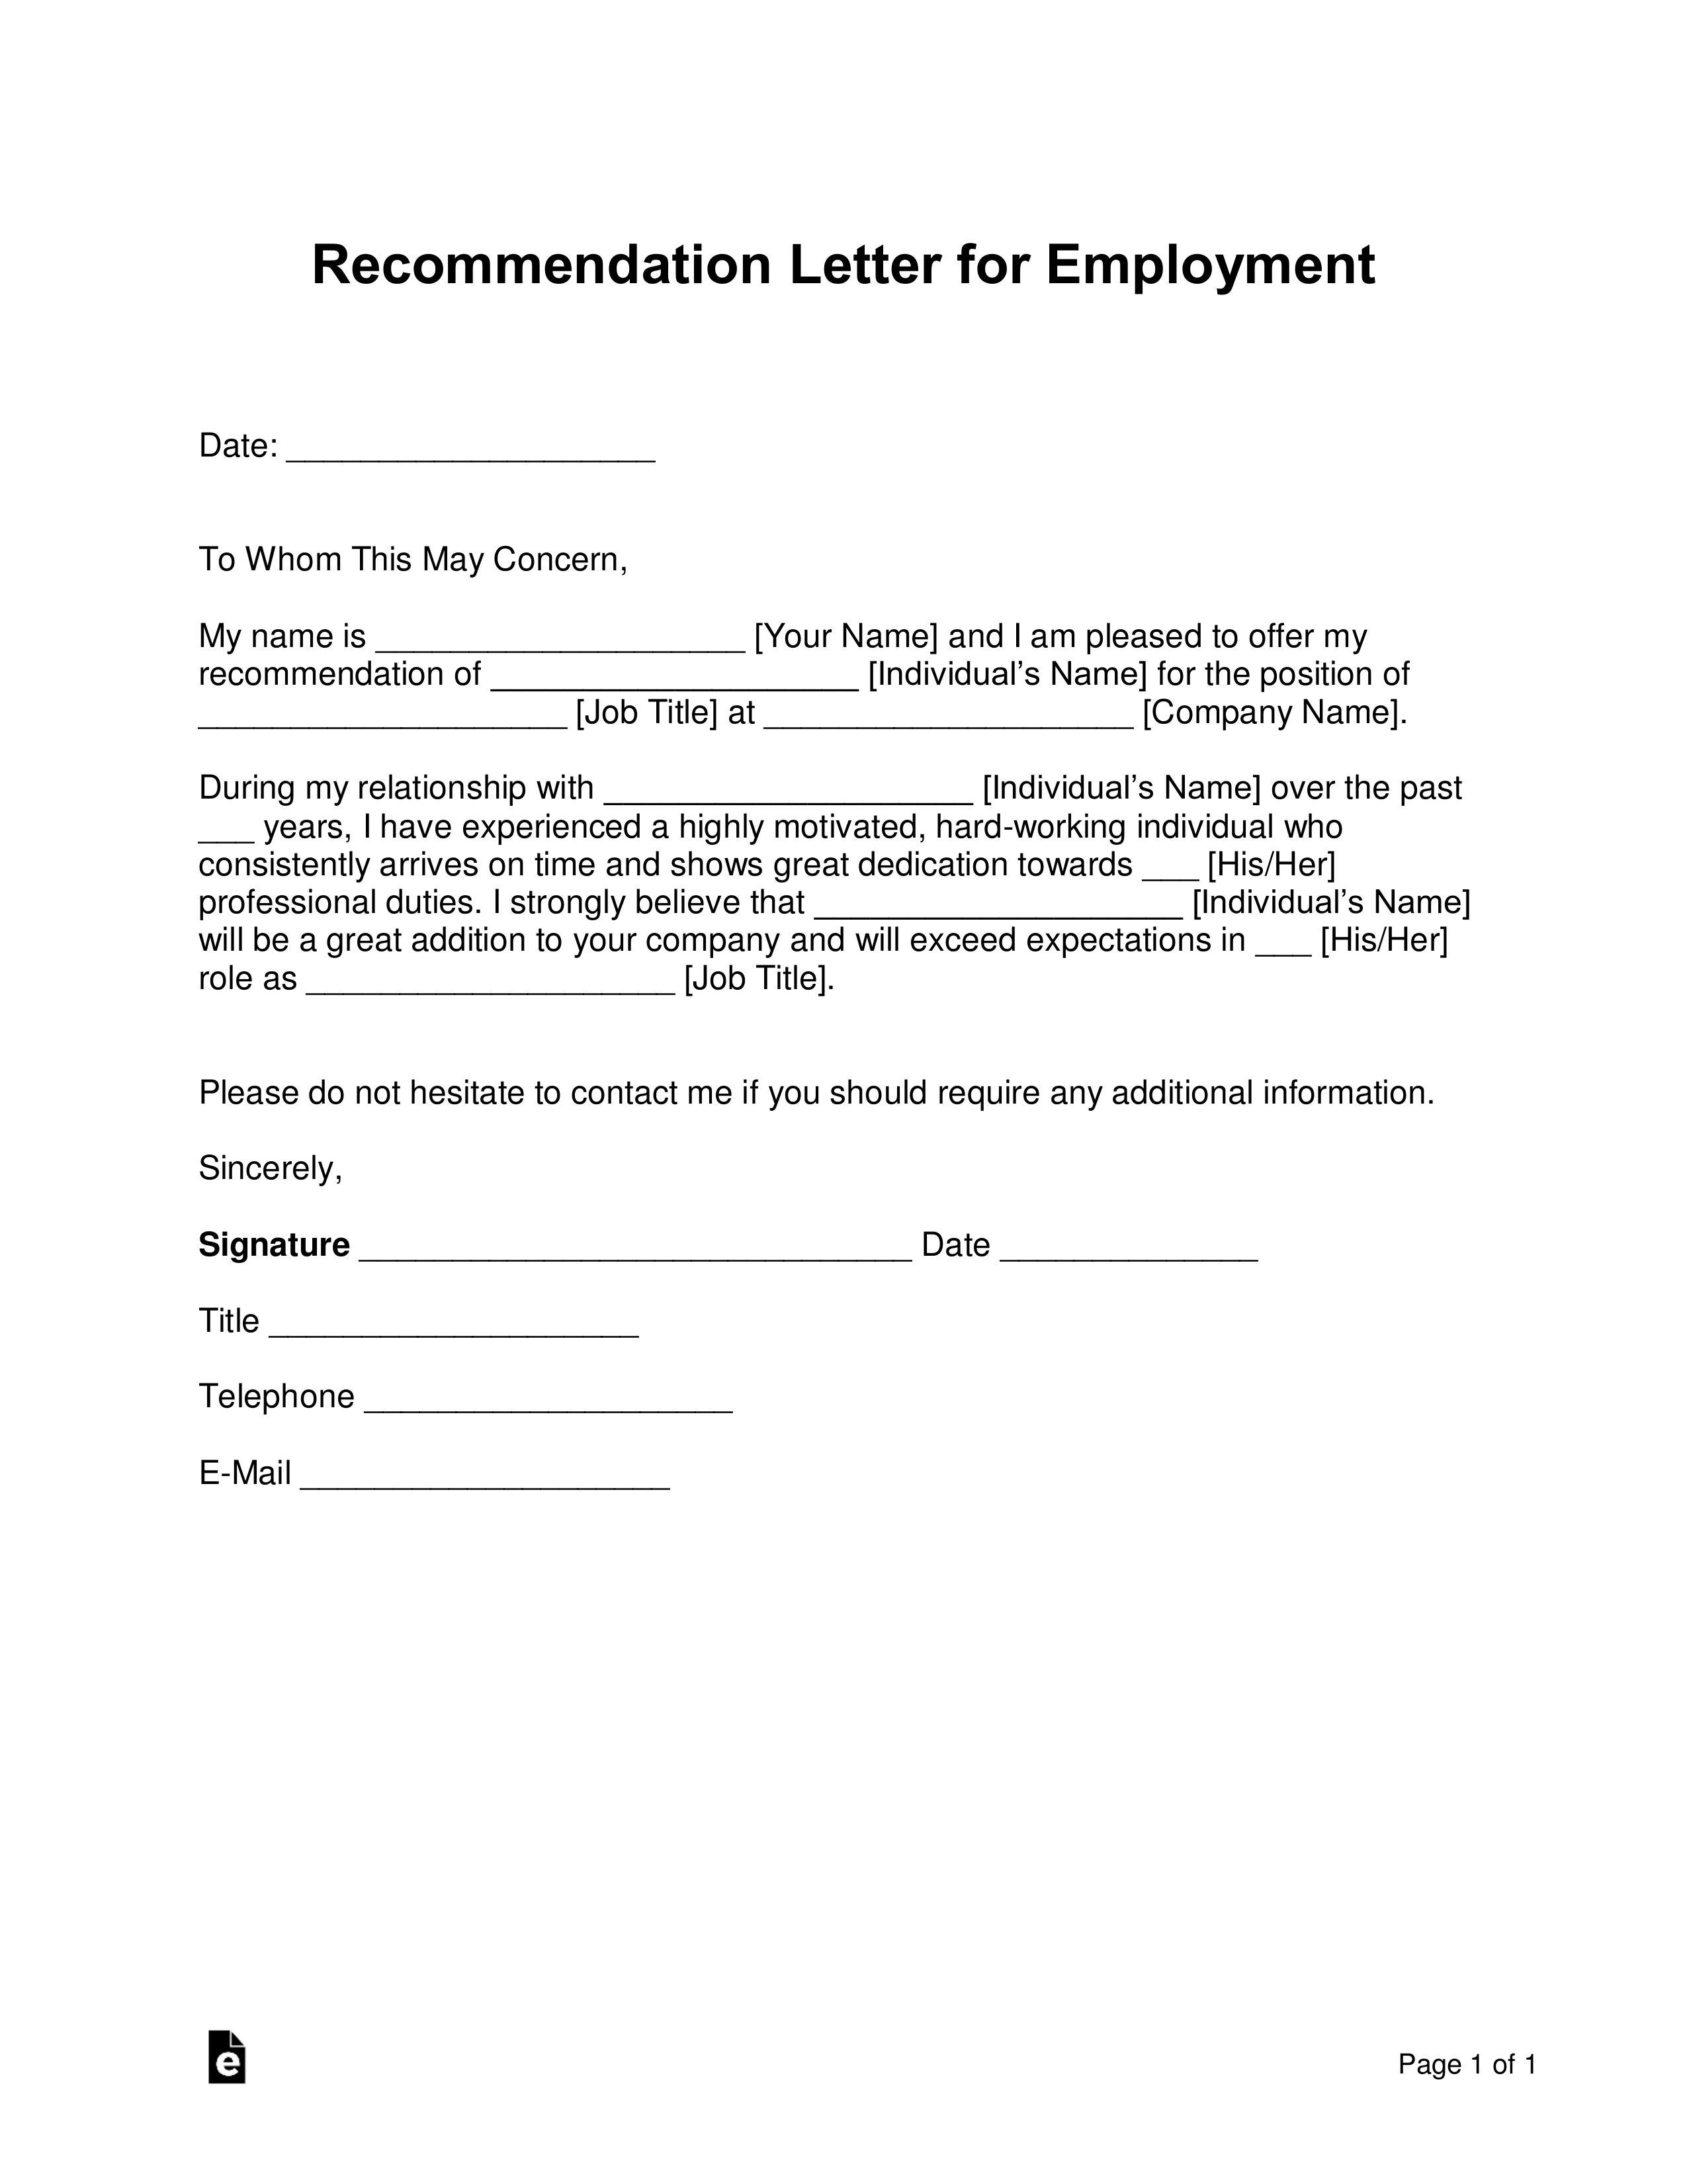 Employment Letter Of Recommendation Samples from eforms.com